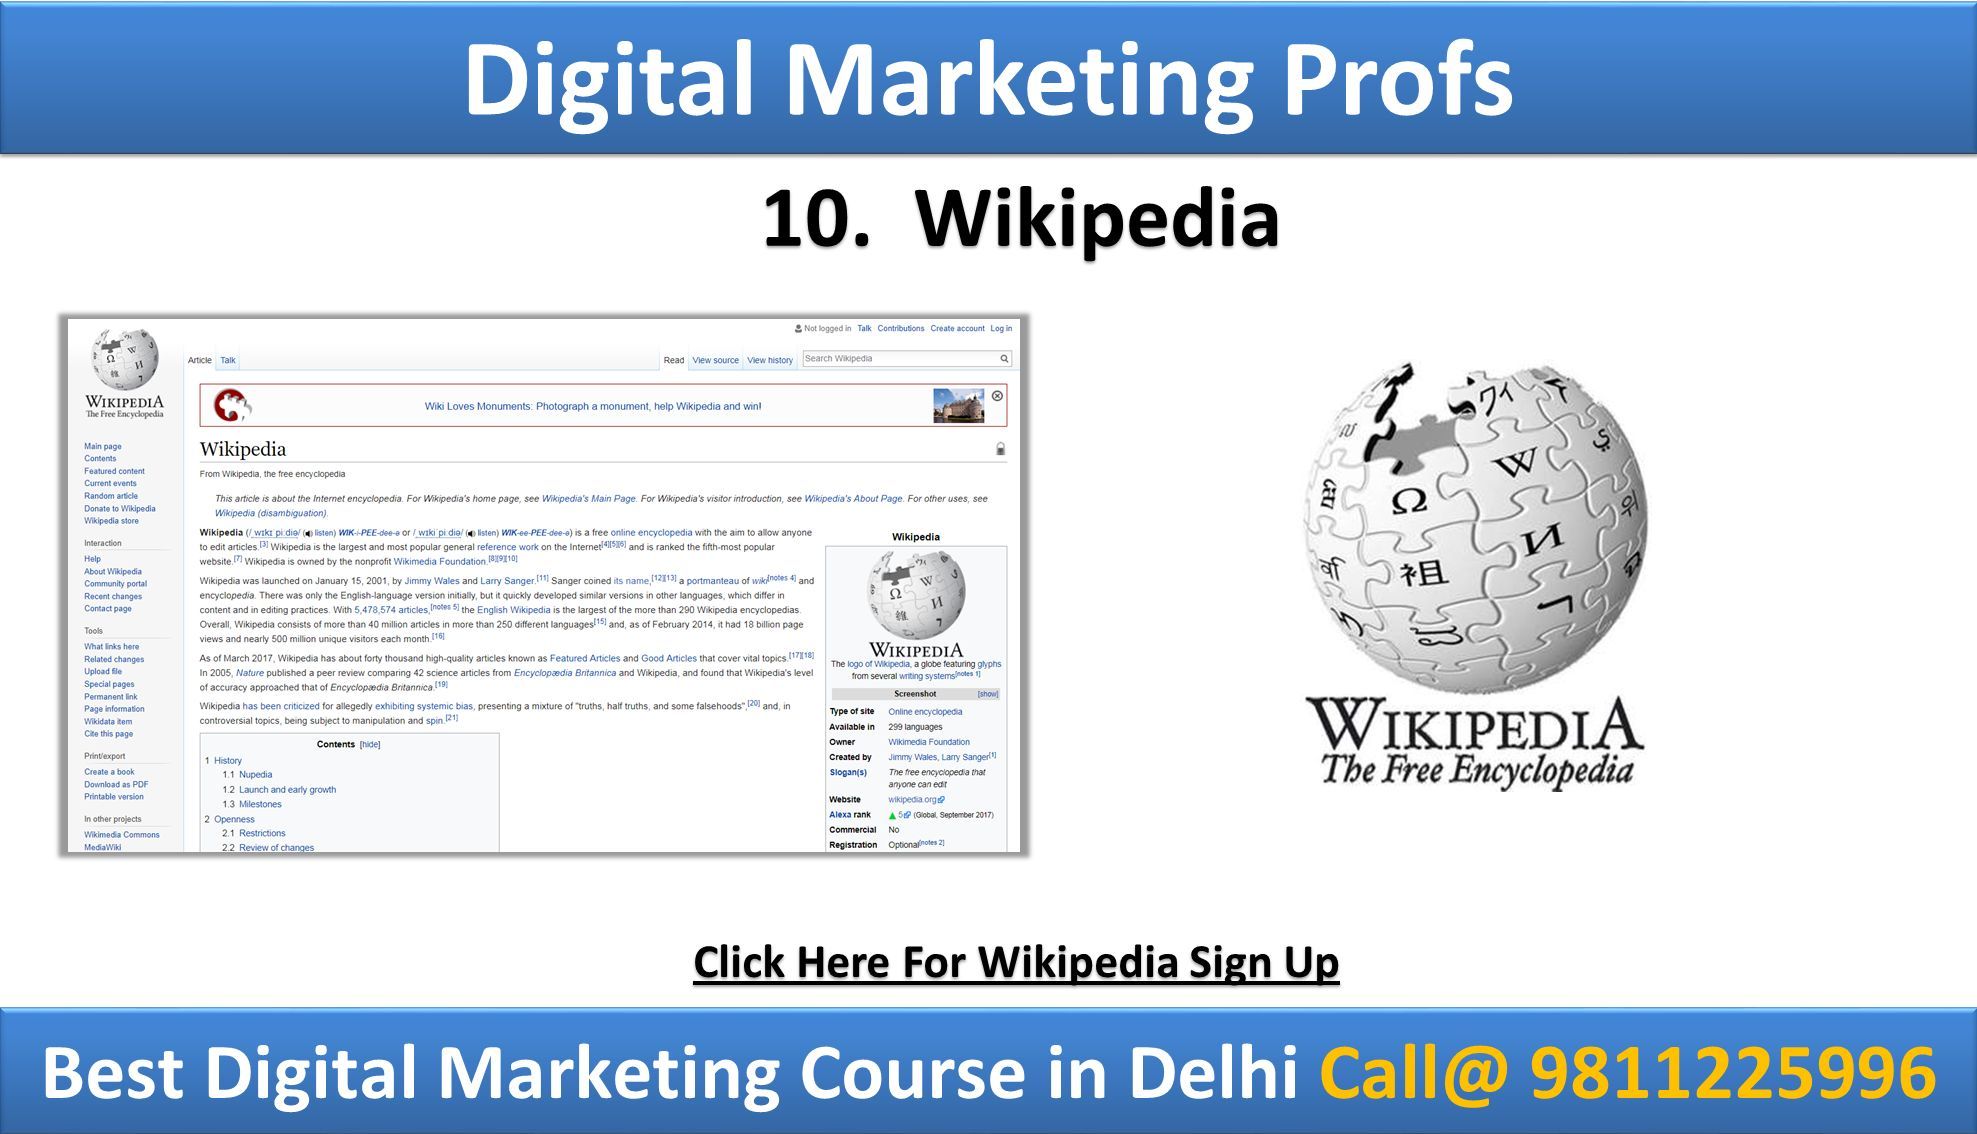 Click Here For Wikipedia Sign Up Best Digital Marketing Course in Delhi Digital Marketing Profs 10.